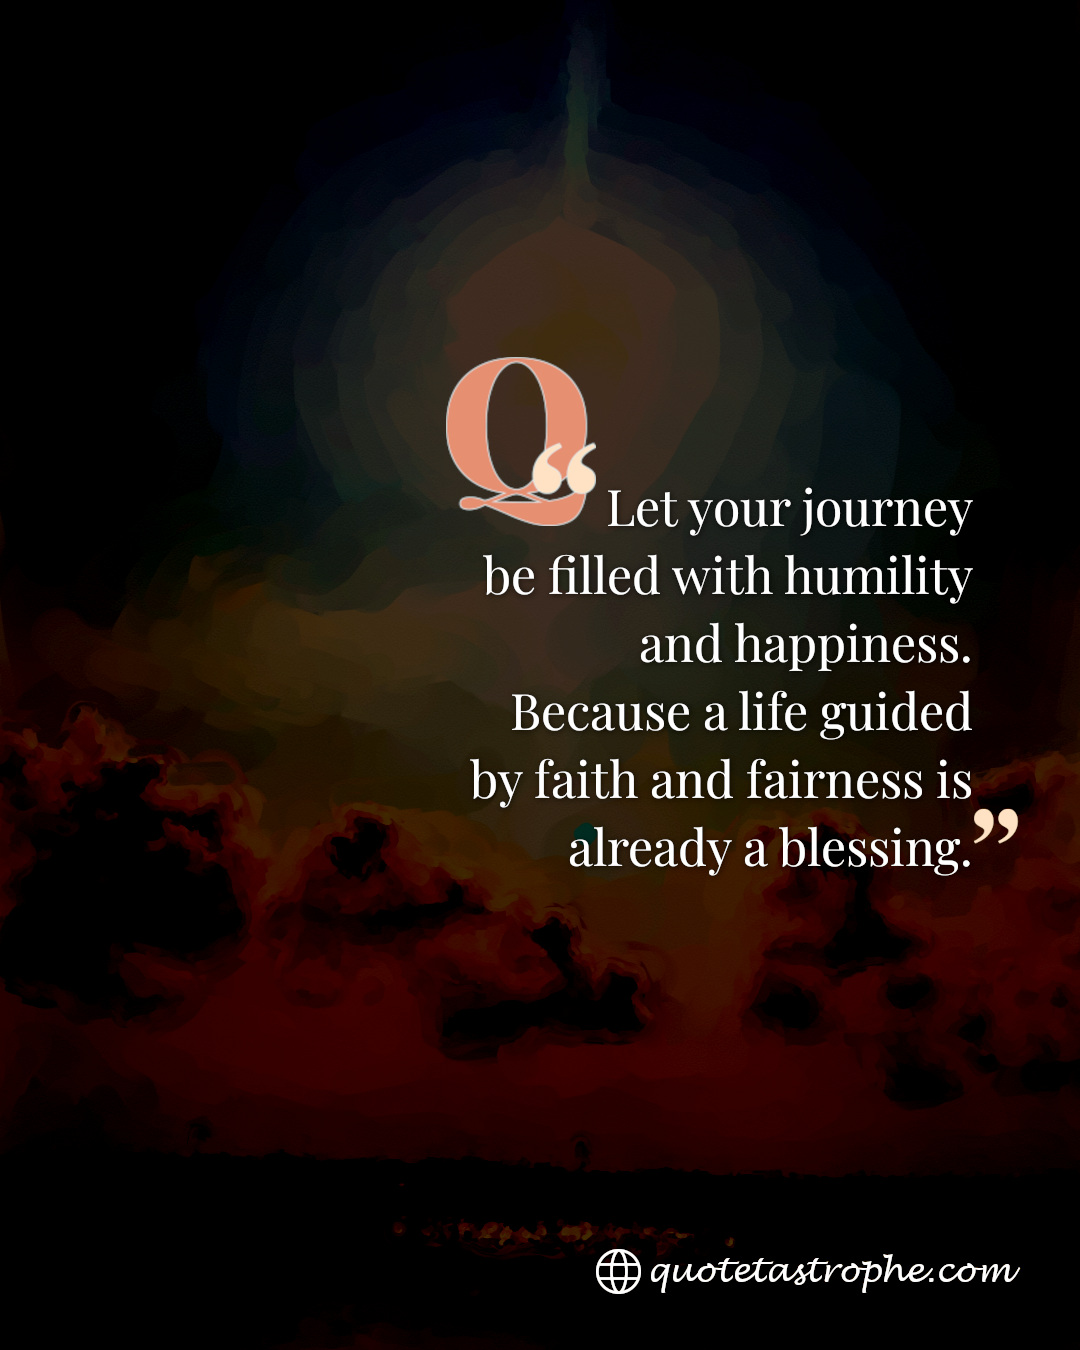 Let Your Journey be Filled with Humility and Happiness